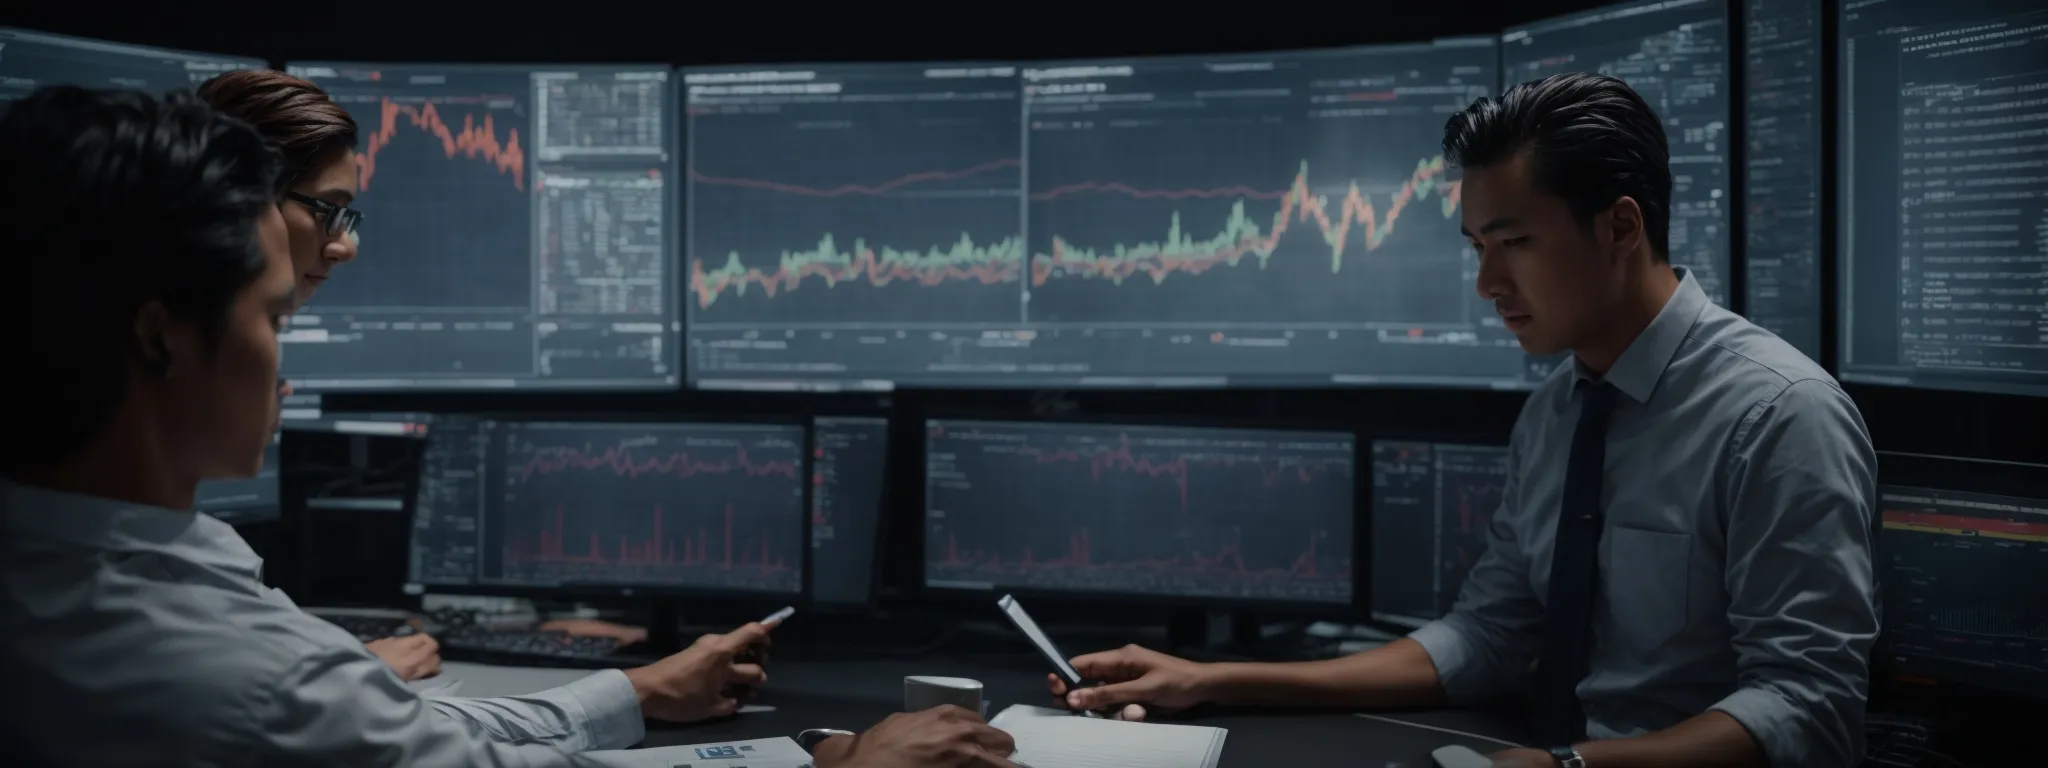 a team of professionals analyzes data on a large screen displaying graphs and charts related to search engine performance.